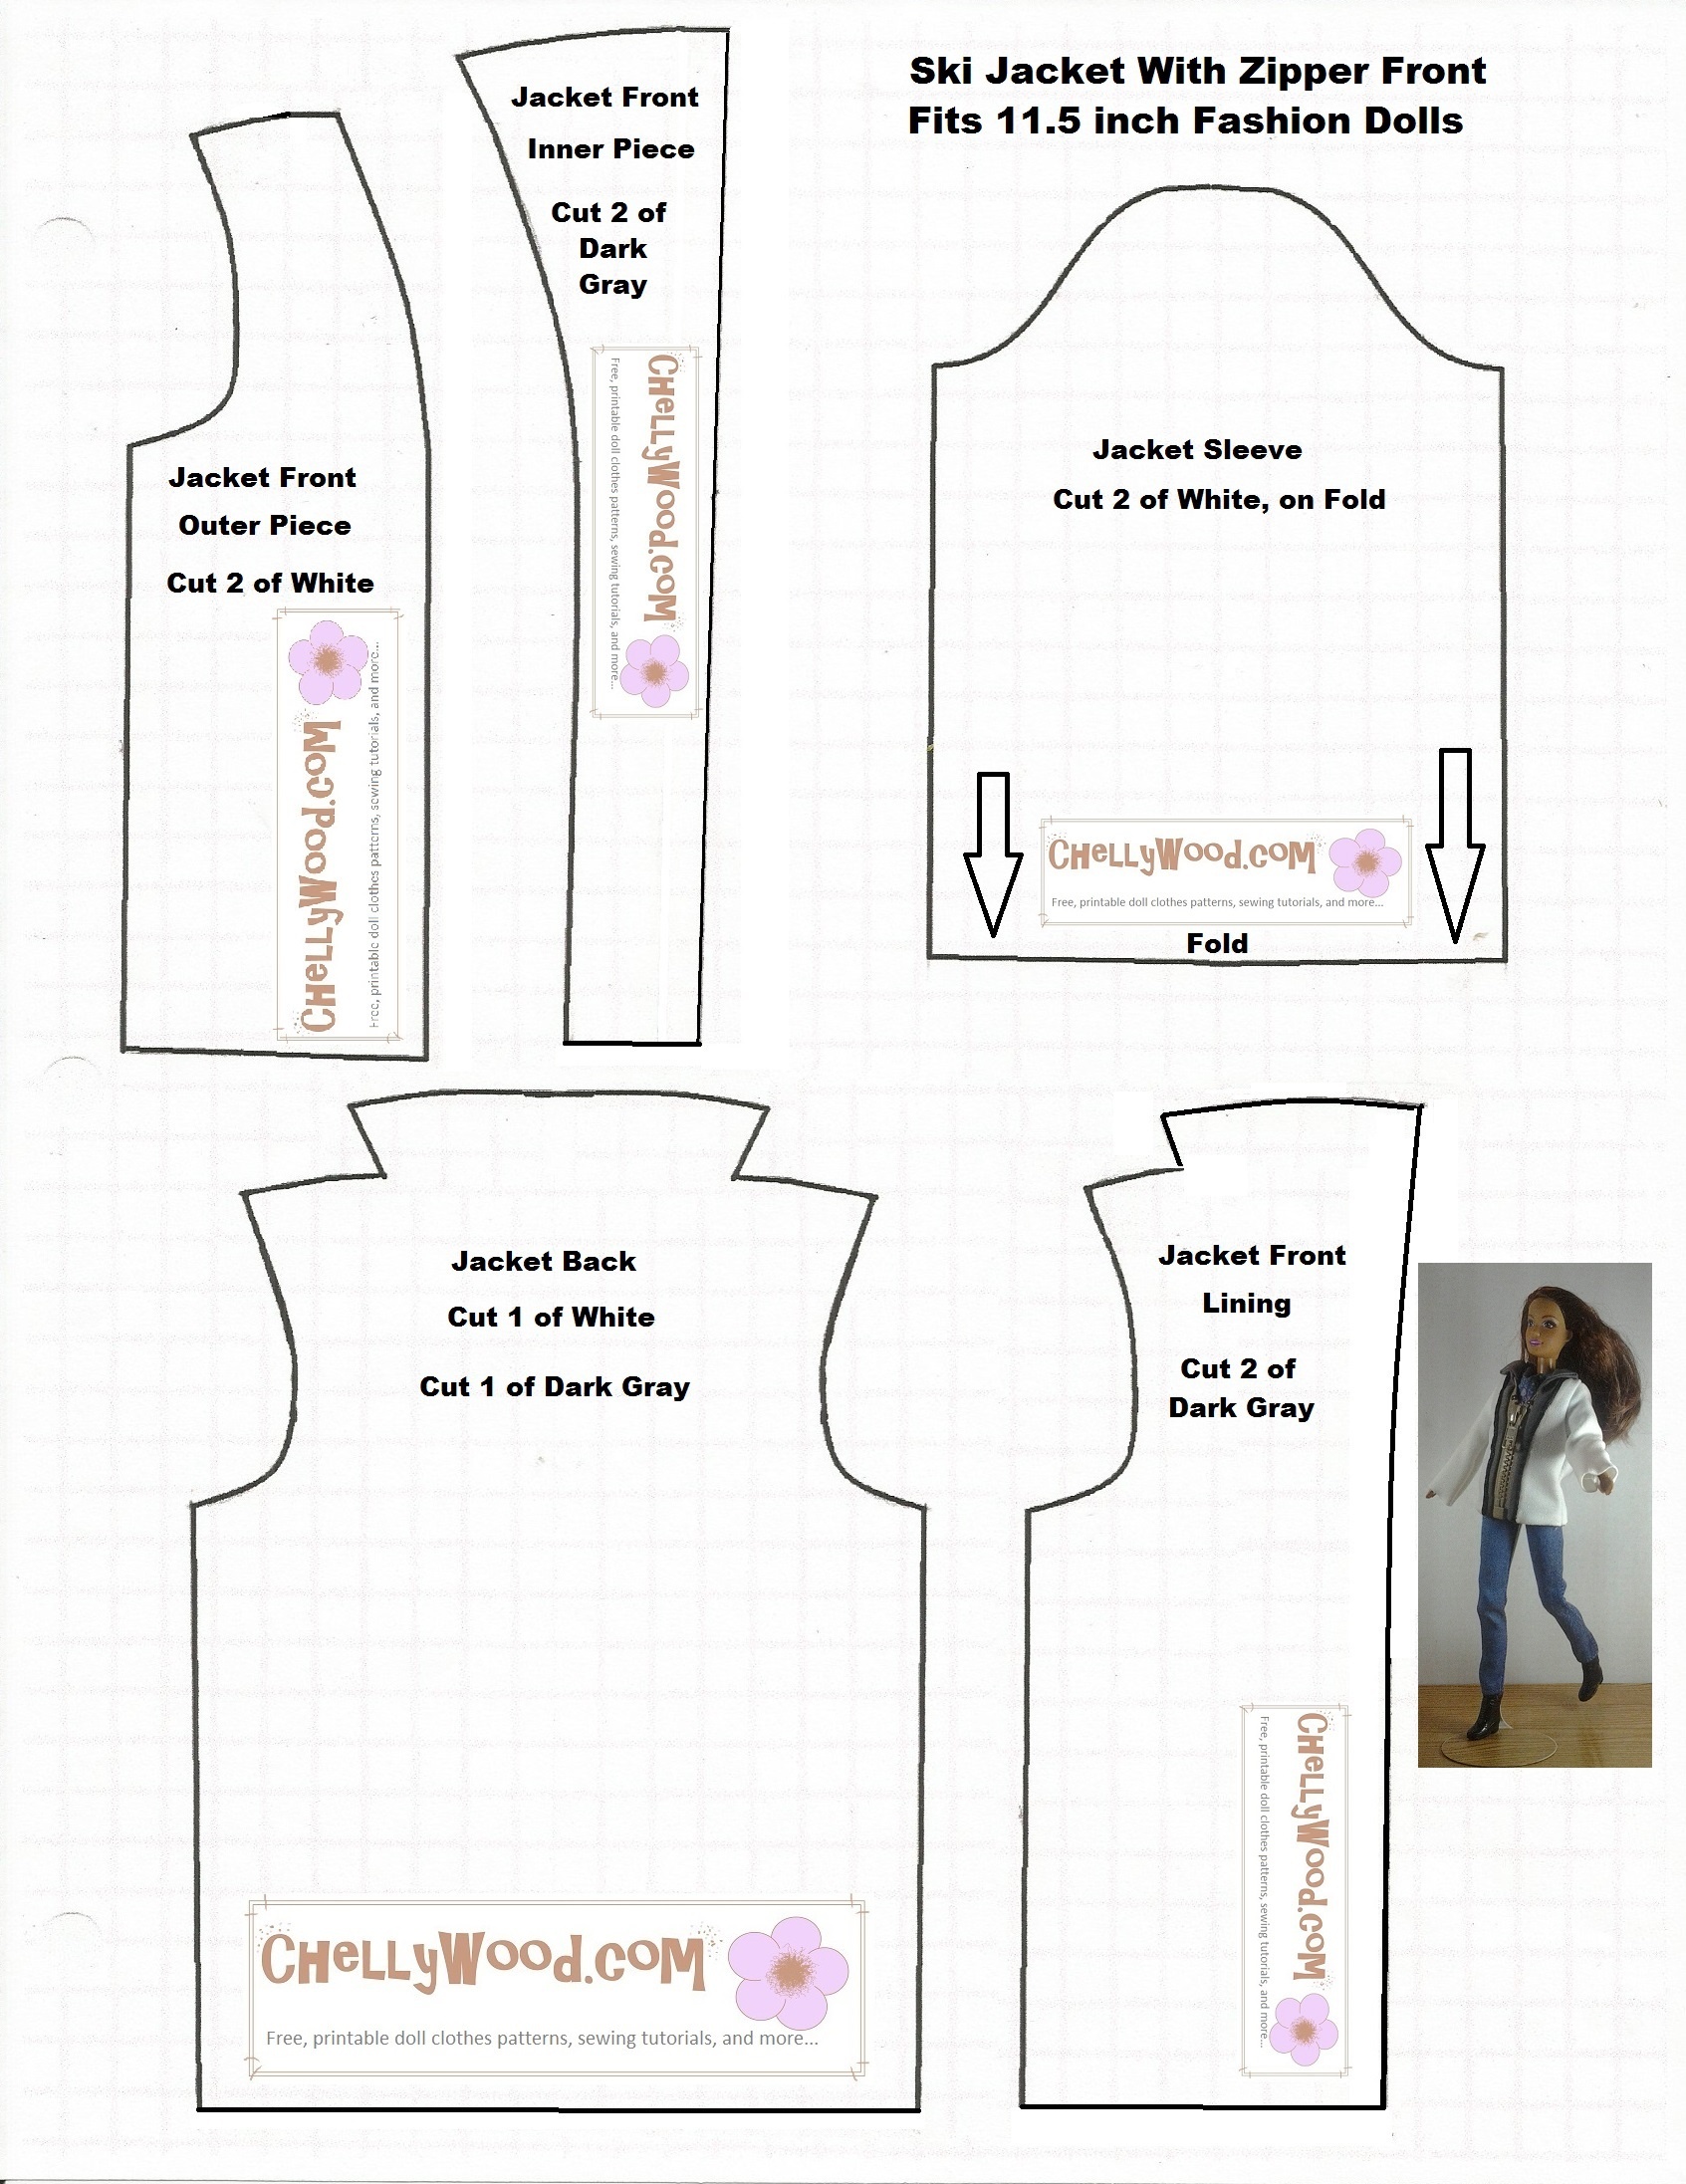 Free Printable Barbie Doll Sewing Patterns Template Printable Templates